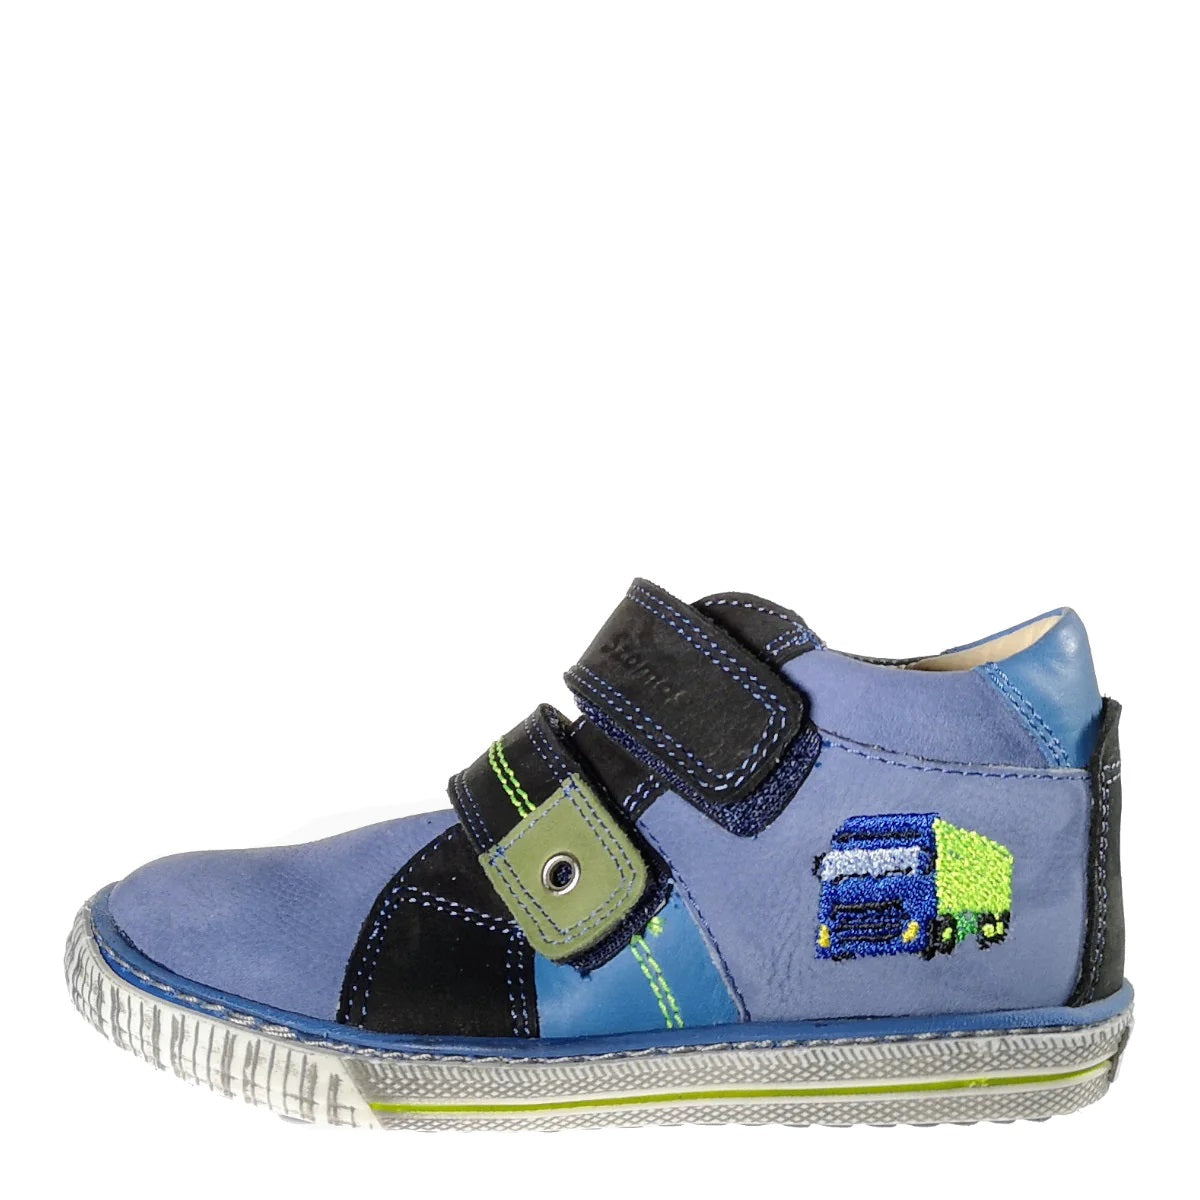 Premium quality shoes made from 100% genuine leather lining and upper, blue with truck decor. This Szamos Kids product meets the highest expectations of healthy and comfortable kids shoes. The exceptional comfort these shoes provide assure the well-being and happiness of your child.